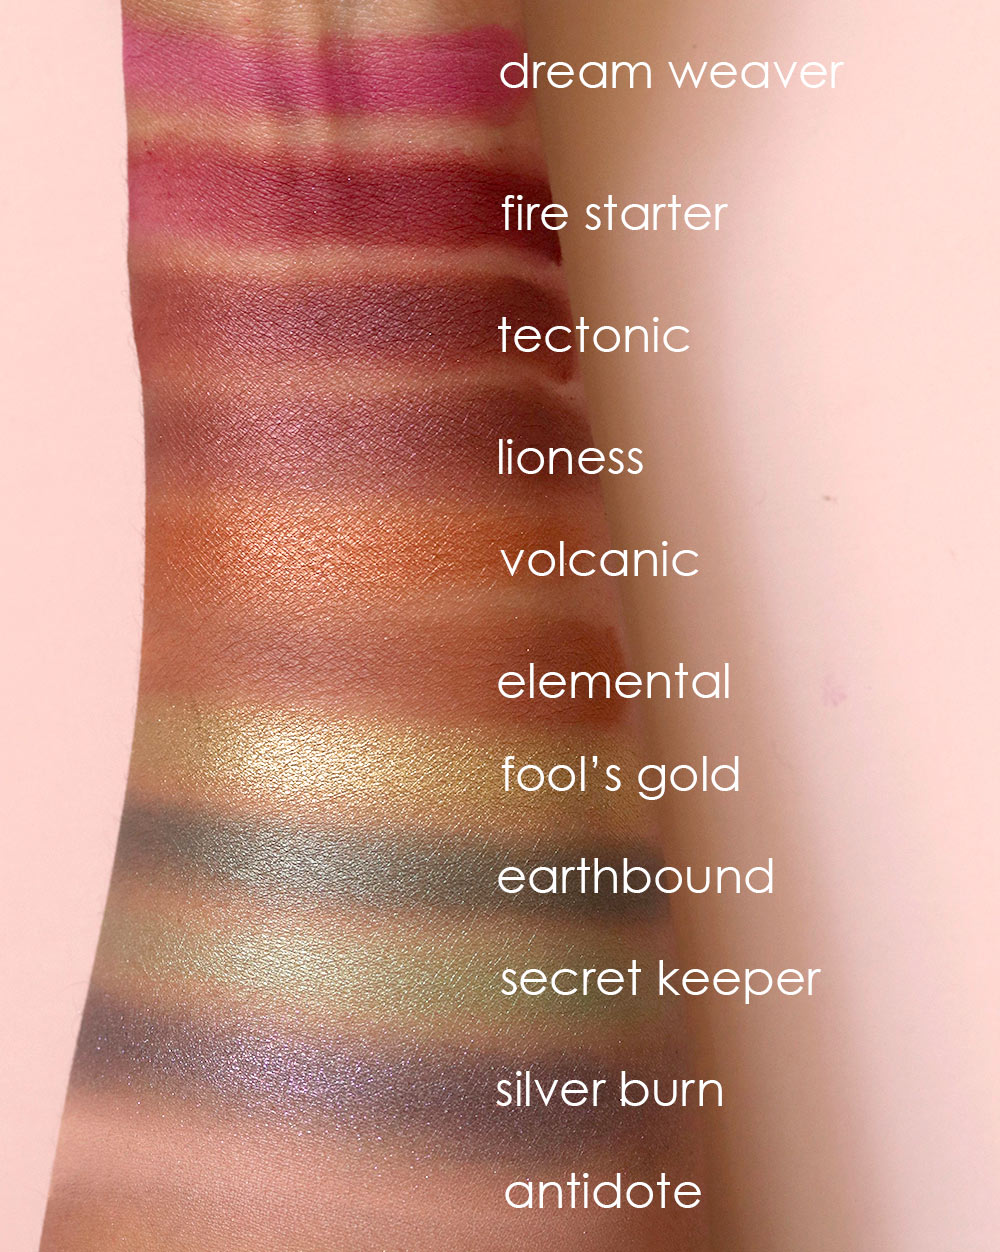 urban decay elemental palette swatches 1